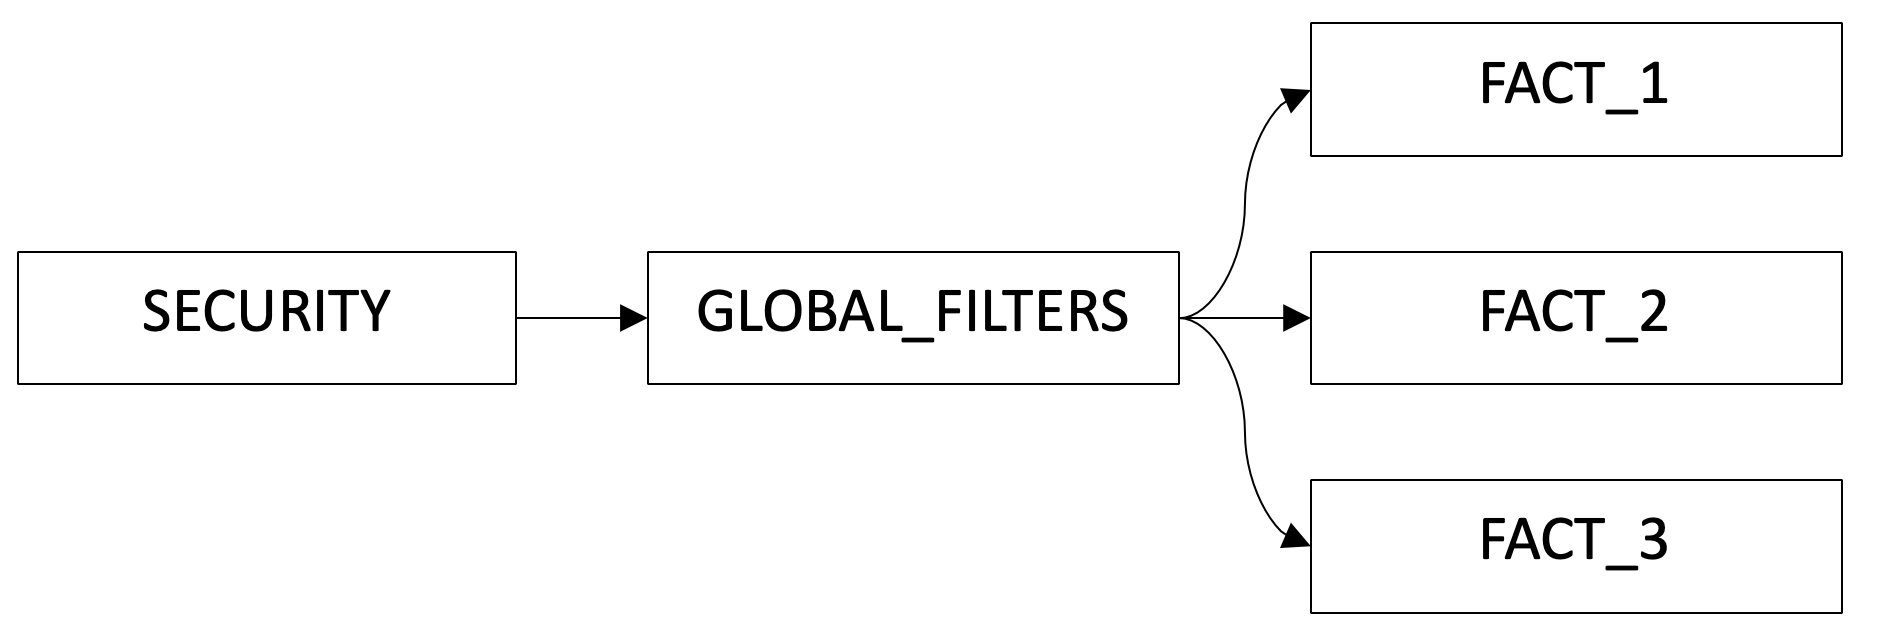 Flow chart from security, to filters, to facts